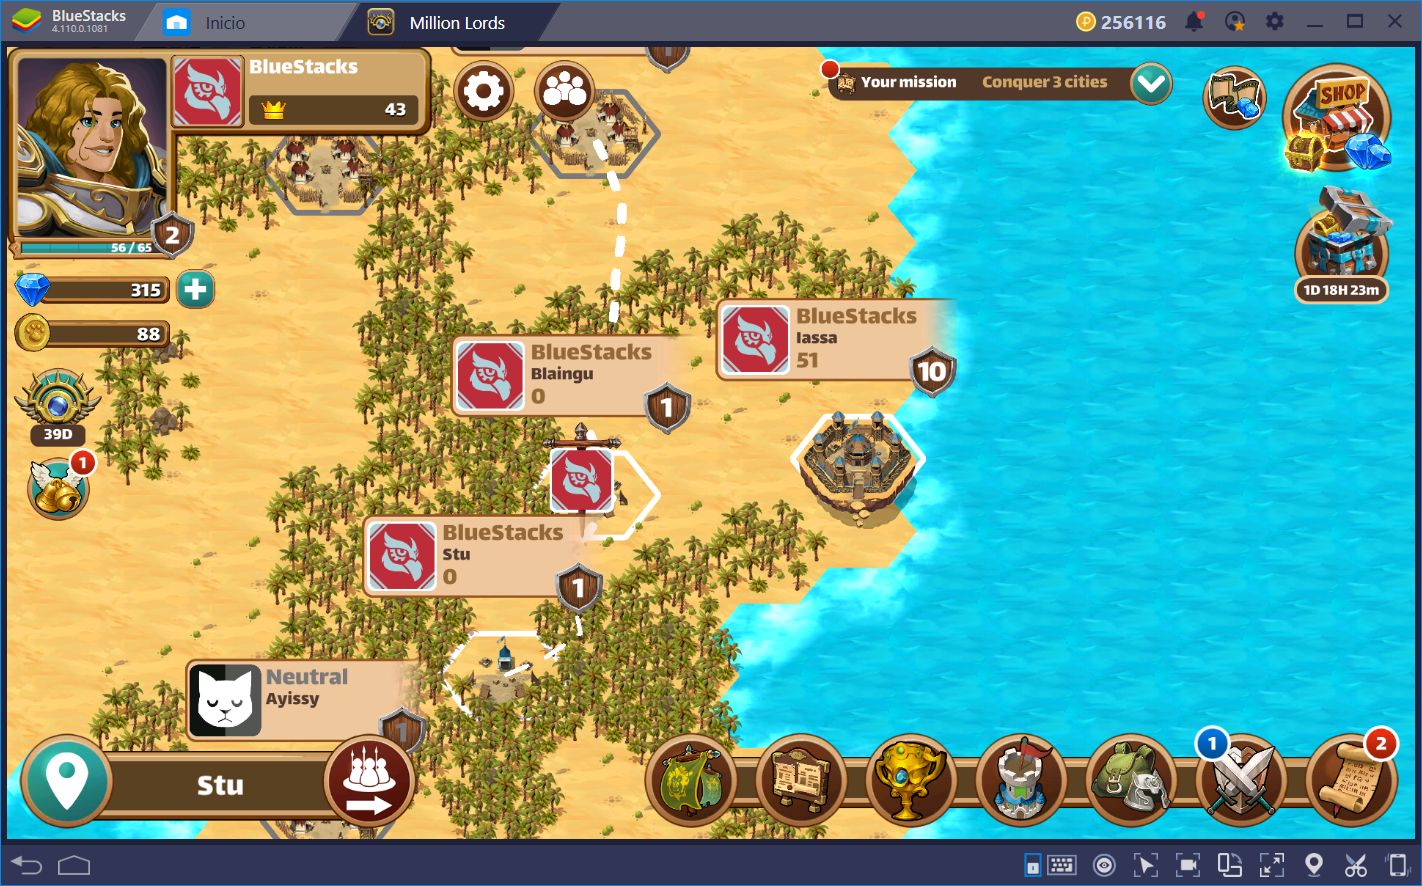 Conquer Your Foes: A Beginner’s Guide to Million Lords on BlueStacks